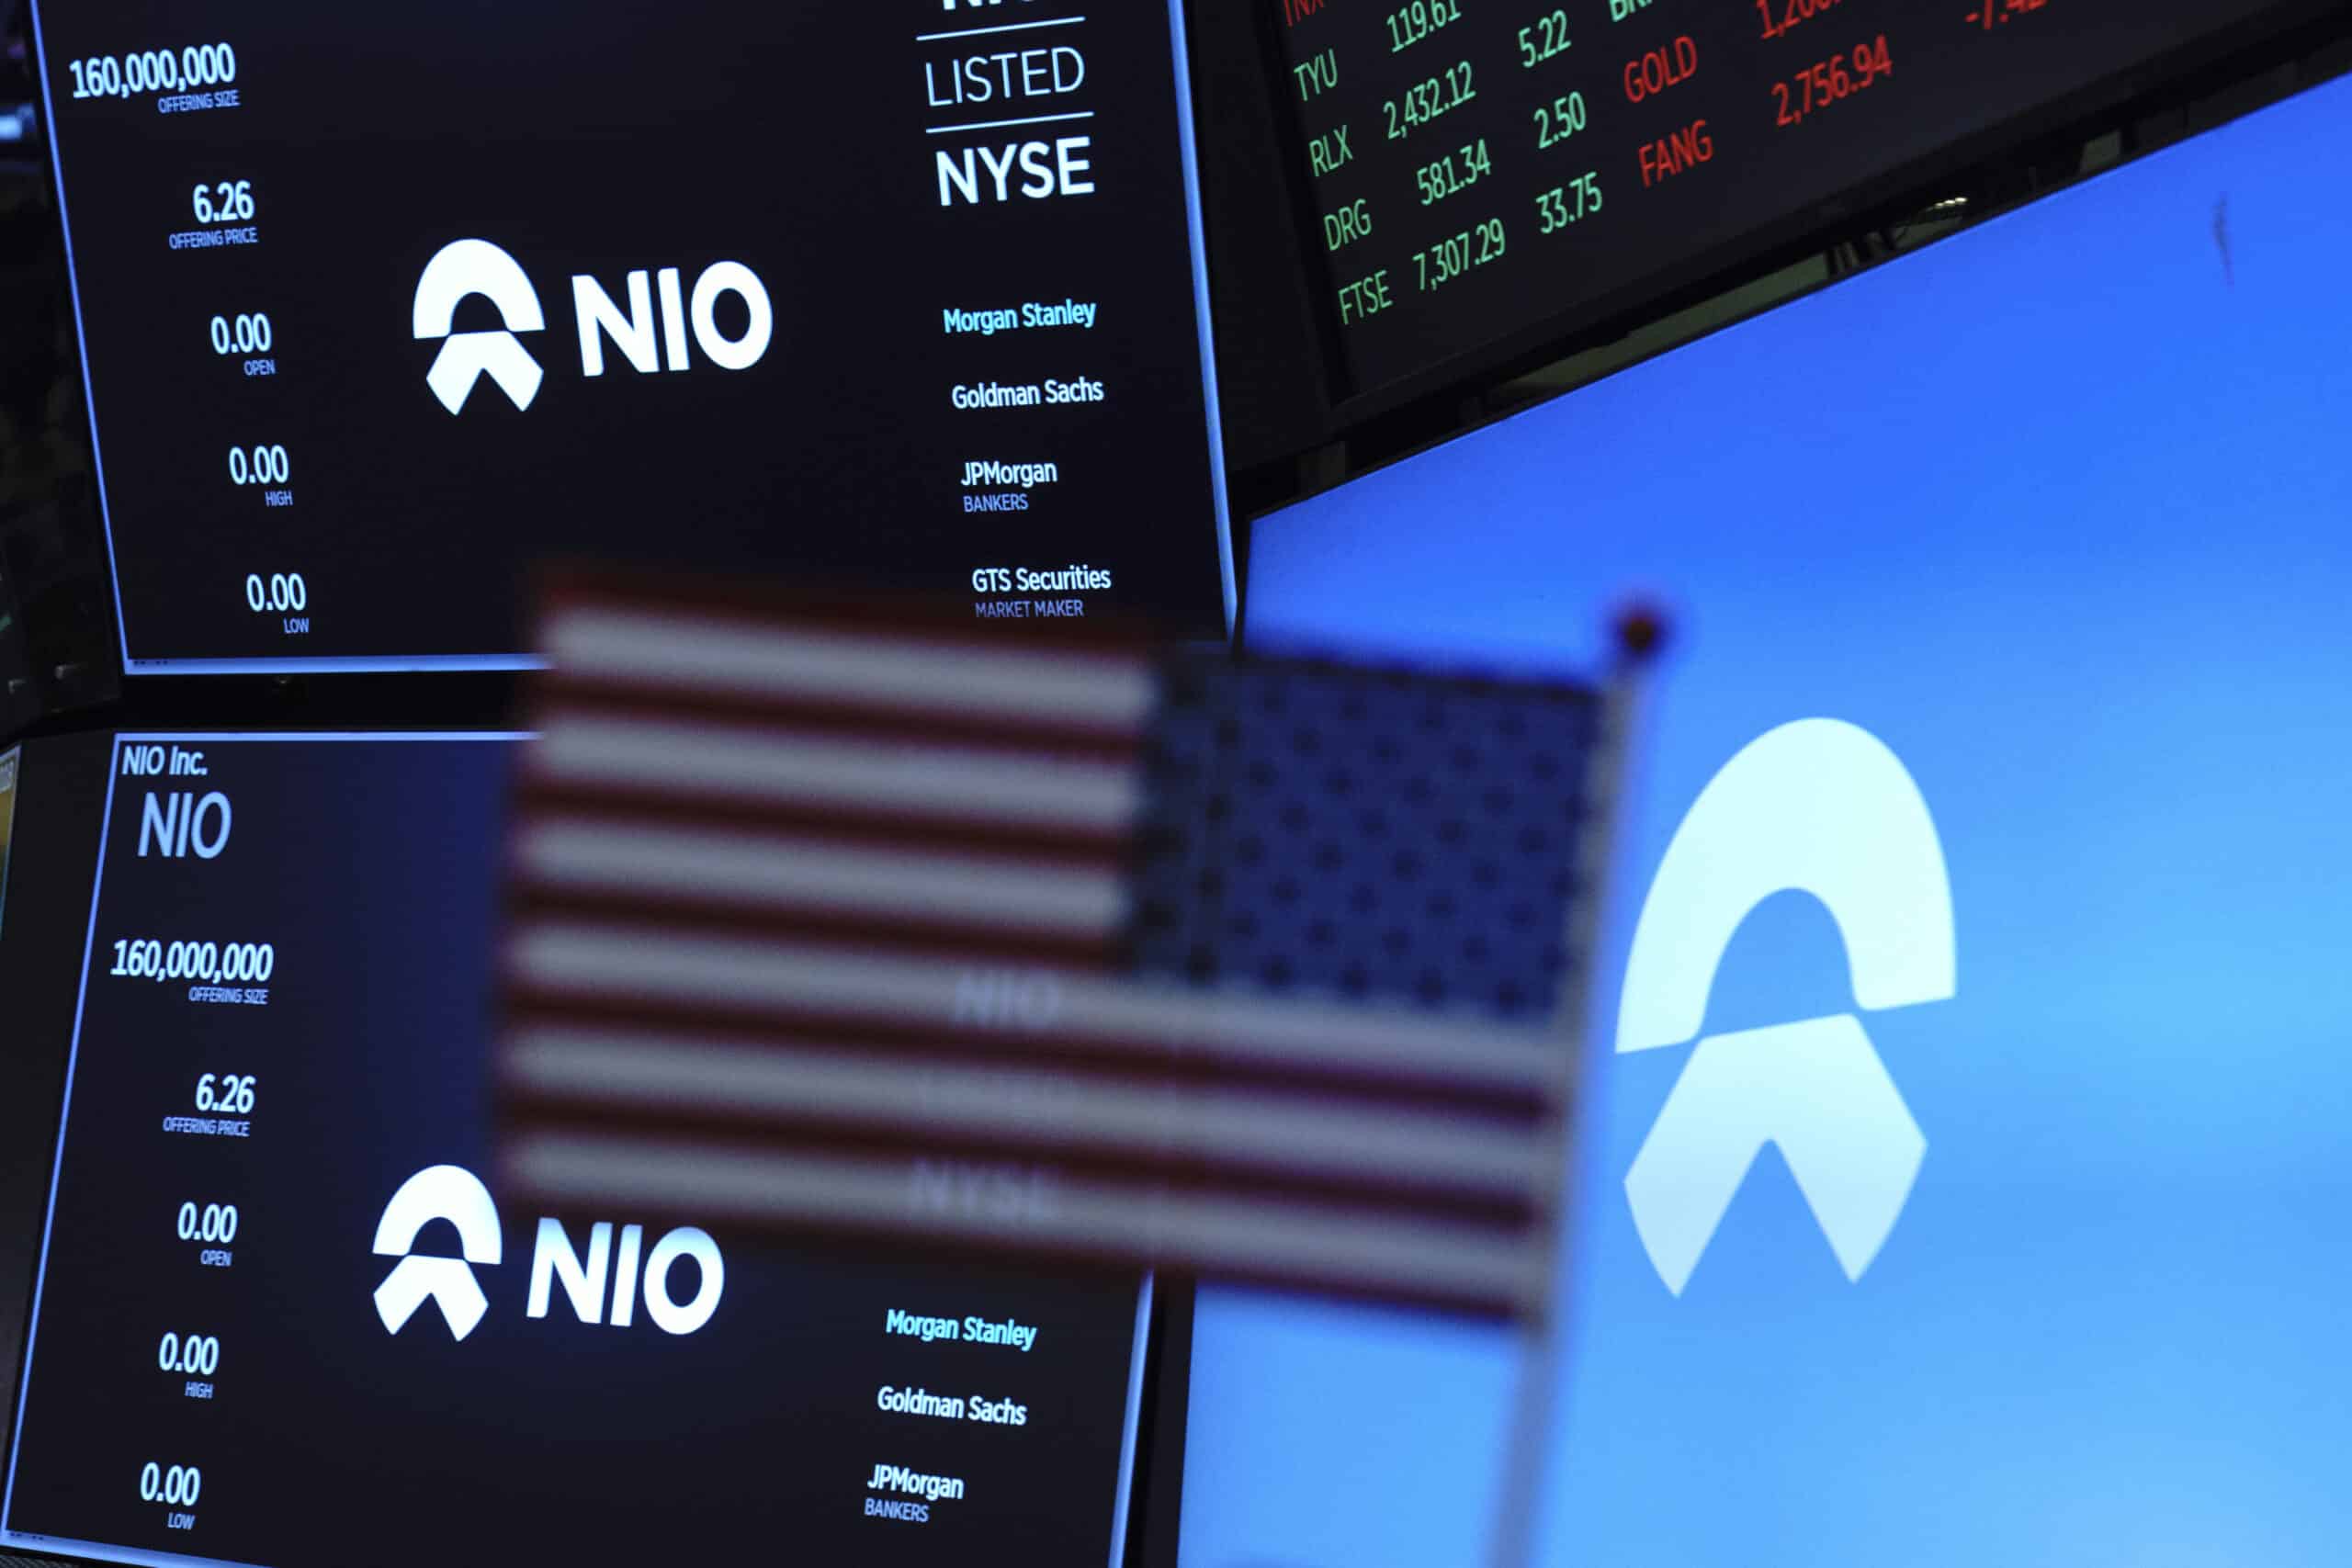 Chinese Electric Car Maker NIO Inc. Opens Trading On NYSE On Day Of Company's IPO